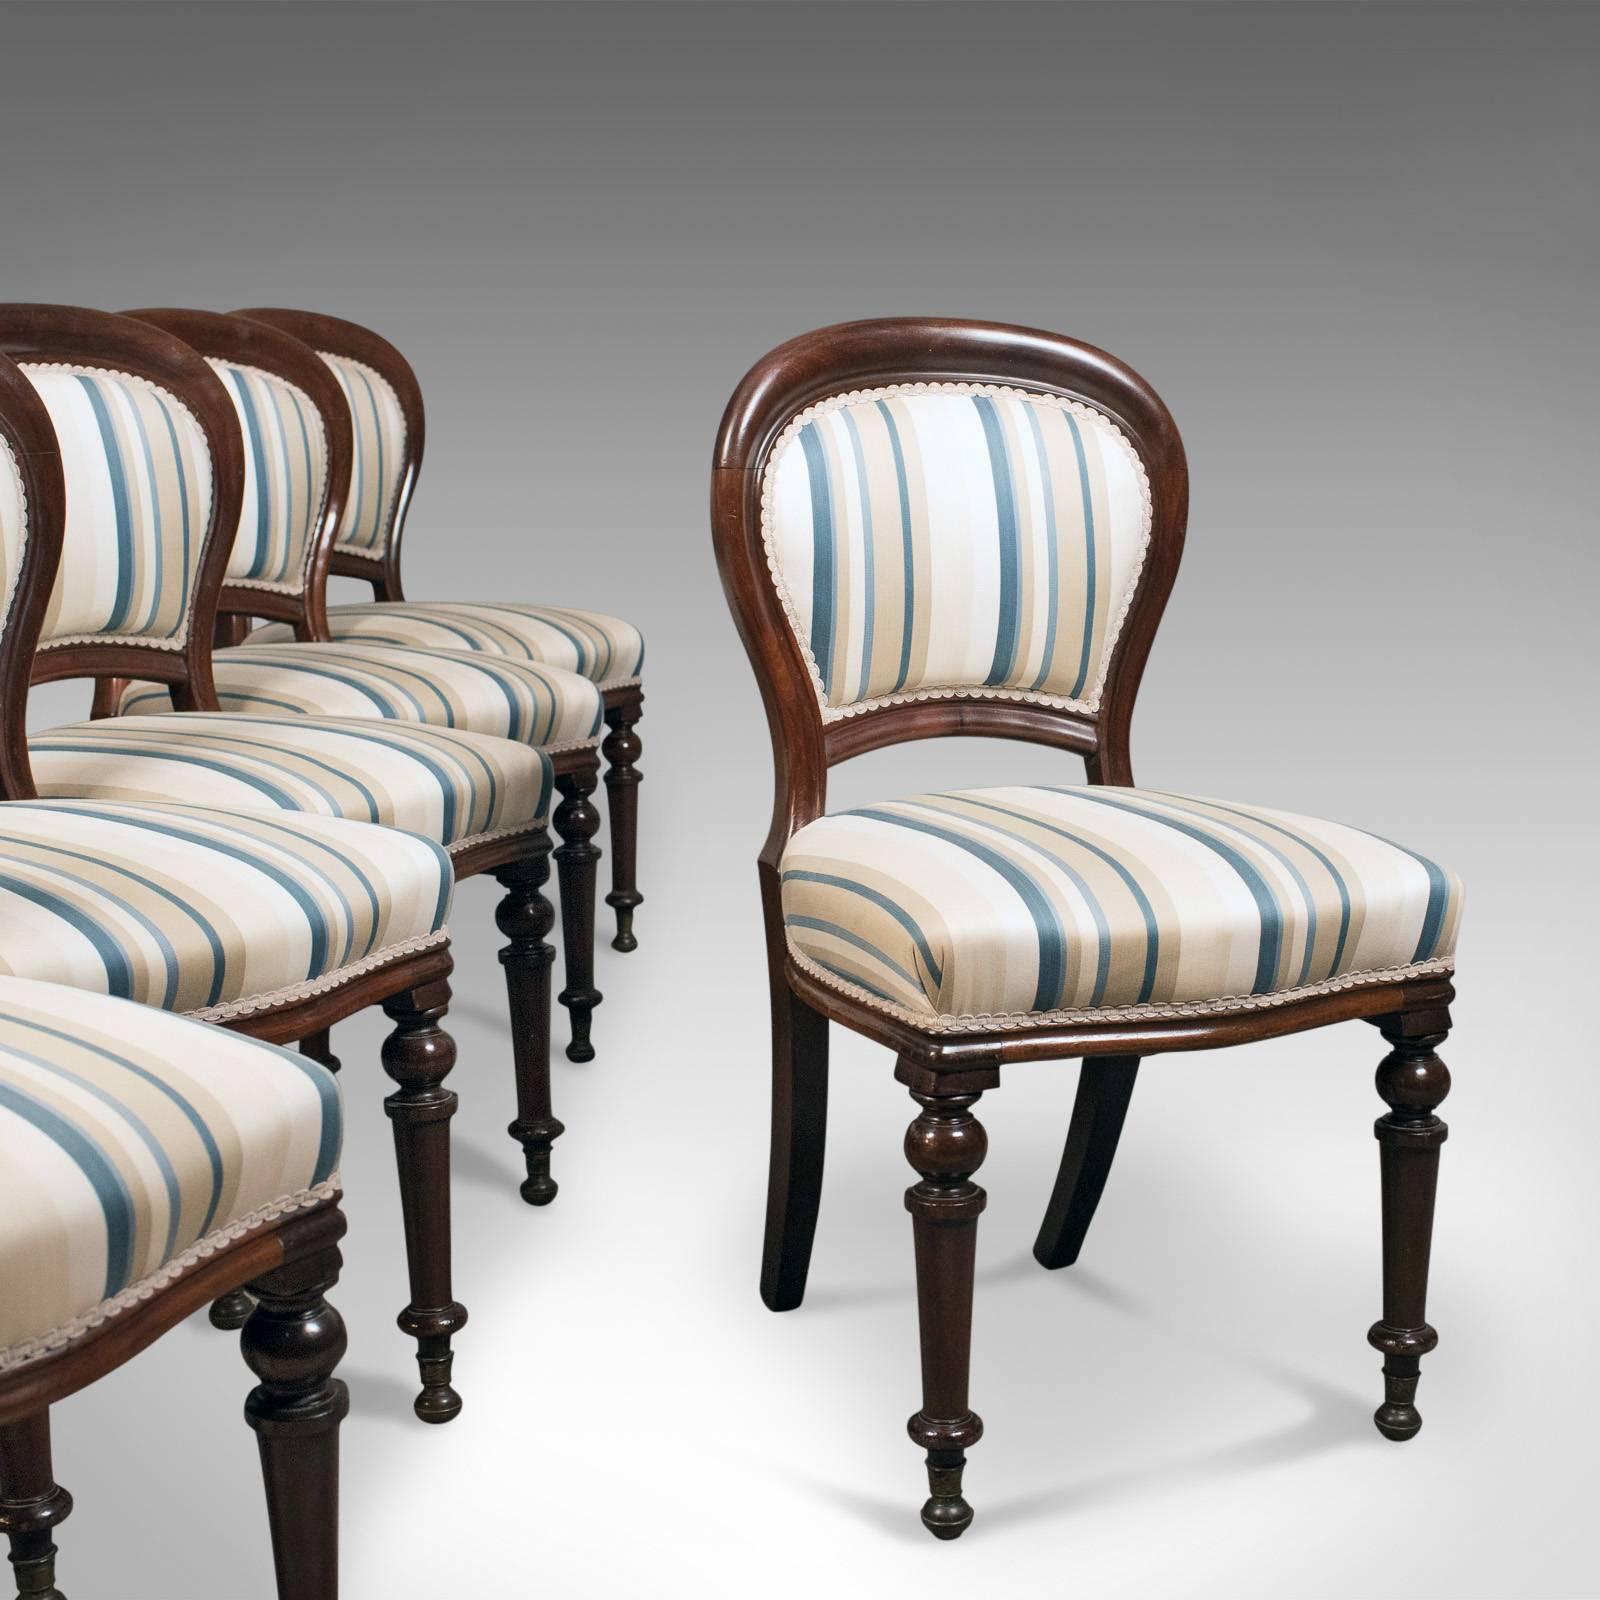 This is a set of six antique dining chairs, English, Victorian, mahogany, circa 1860.

Very fine examples, in very good order
Dark, polished, heavy mahogany frames
Well stuffed and sprung offering a comfortable seat

Professionally upholstered